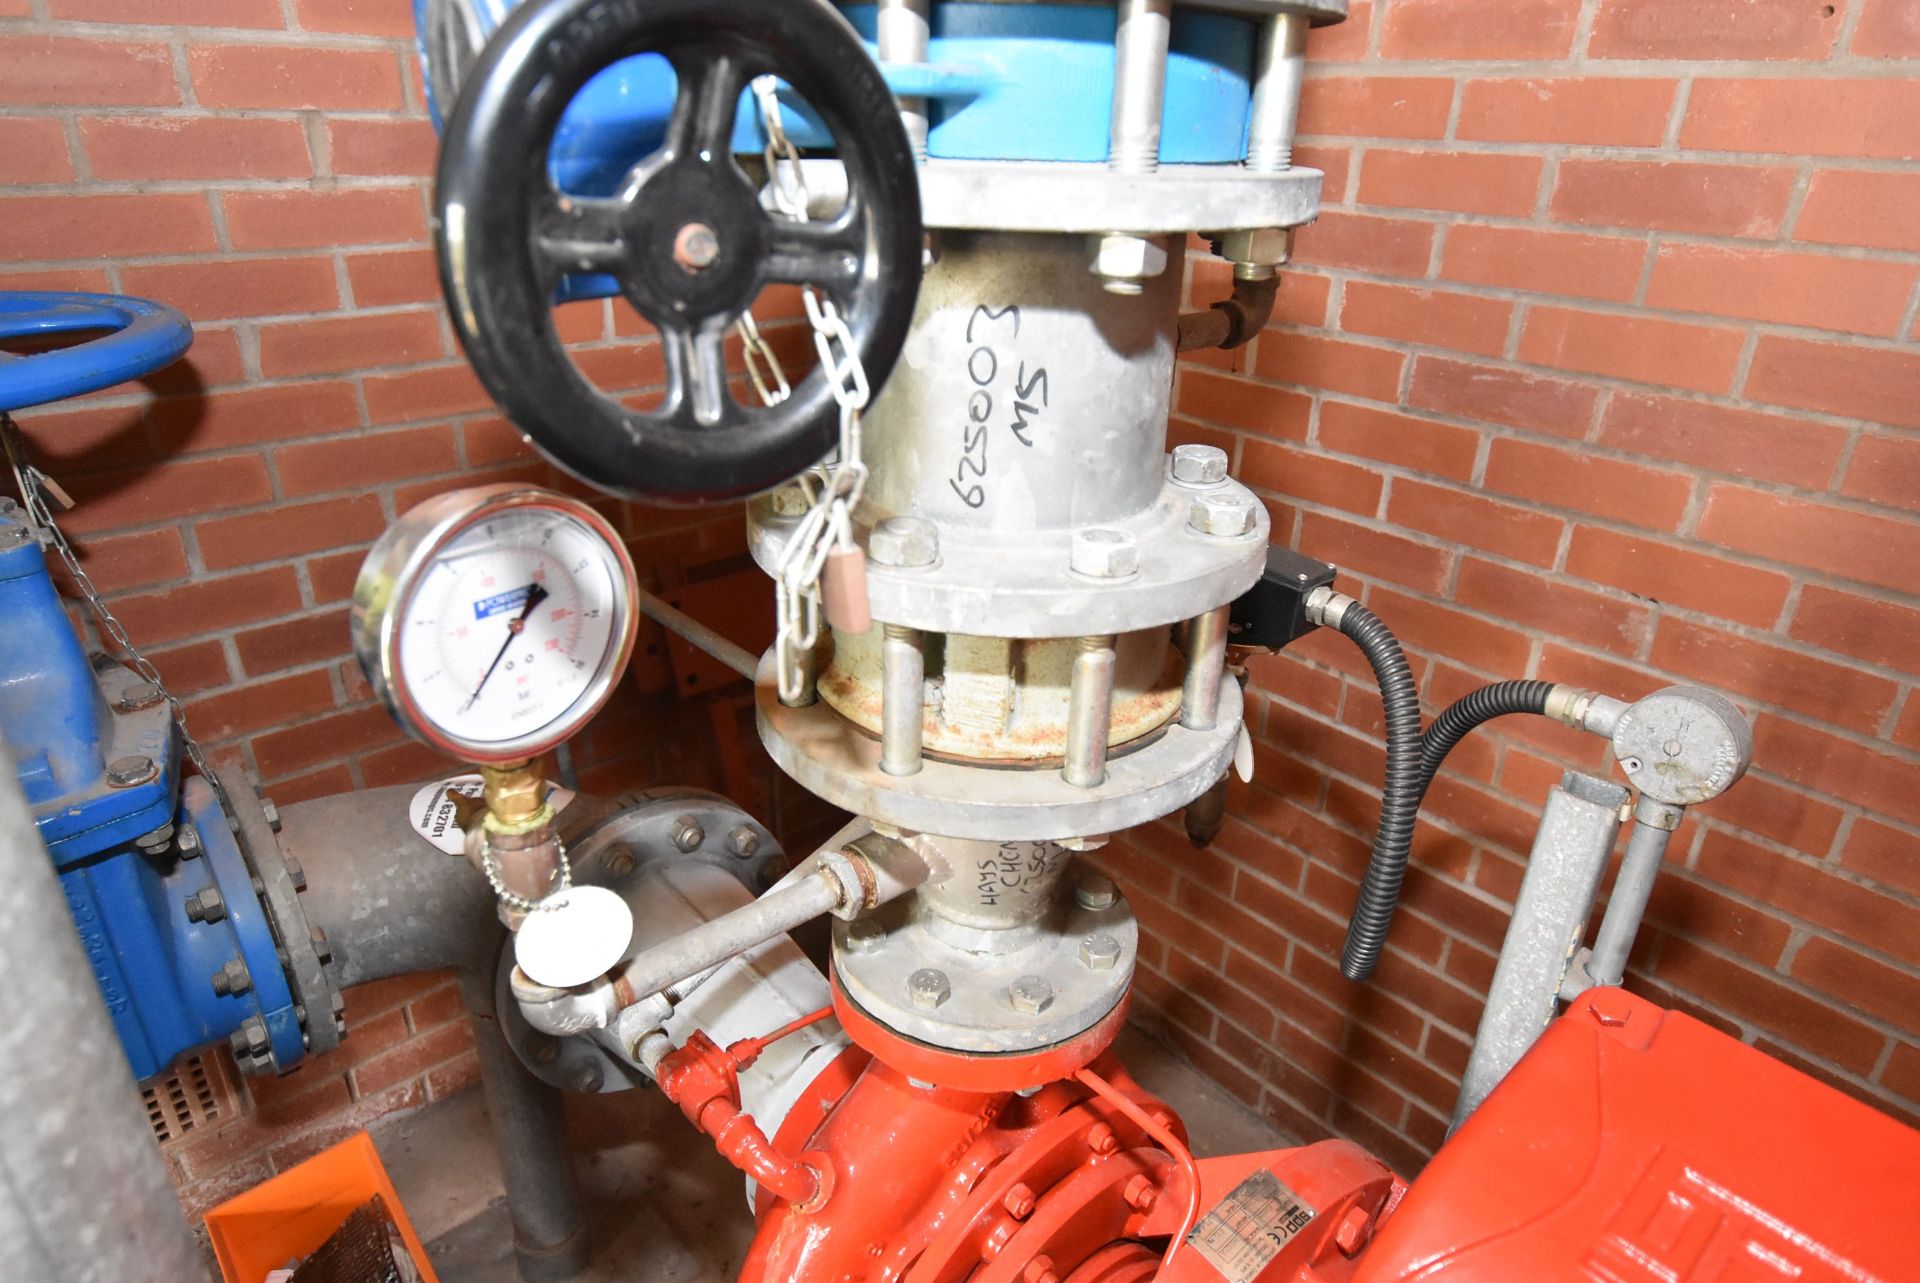 SPP KM08E Fire Water Pump, serial no. 1846032/1A, 33.34L/S cap., with Weg 45kW electric motor, - Image 5 of 11